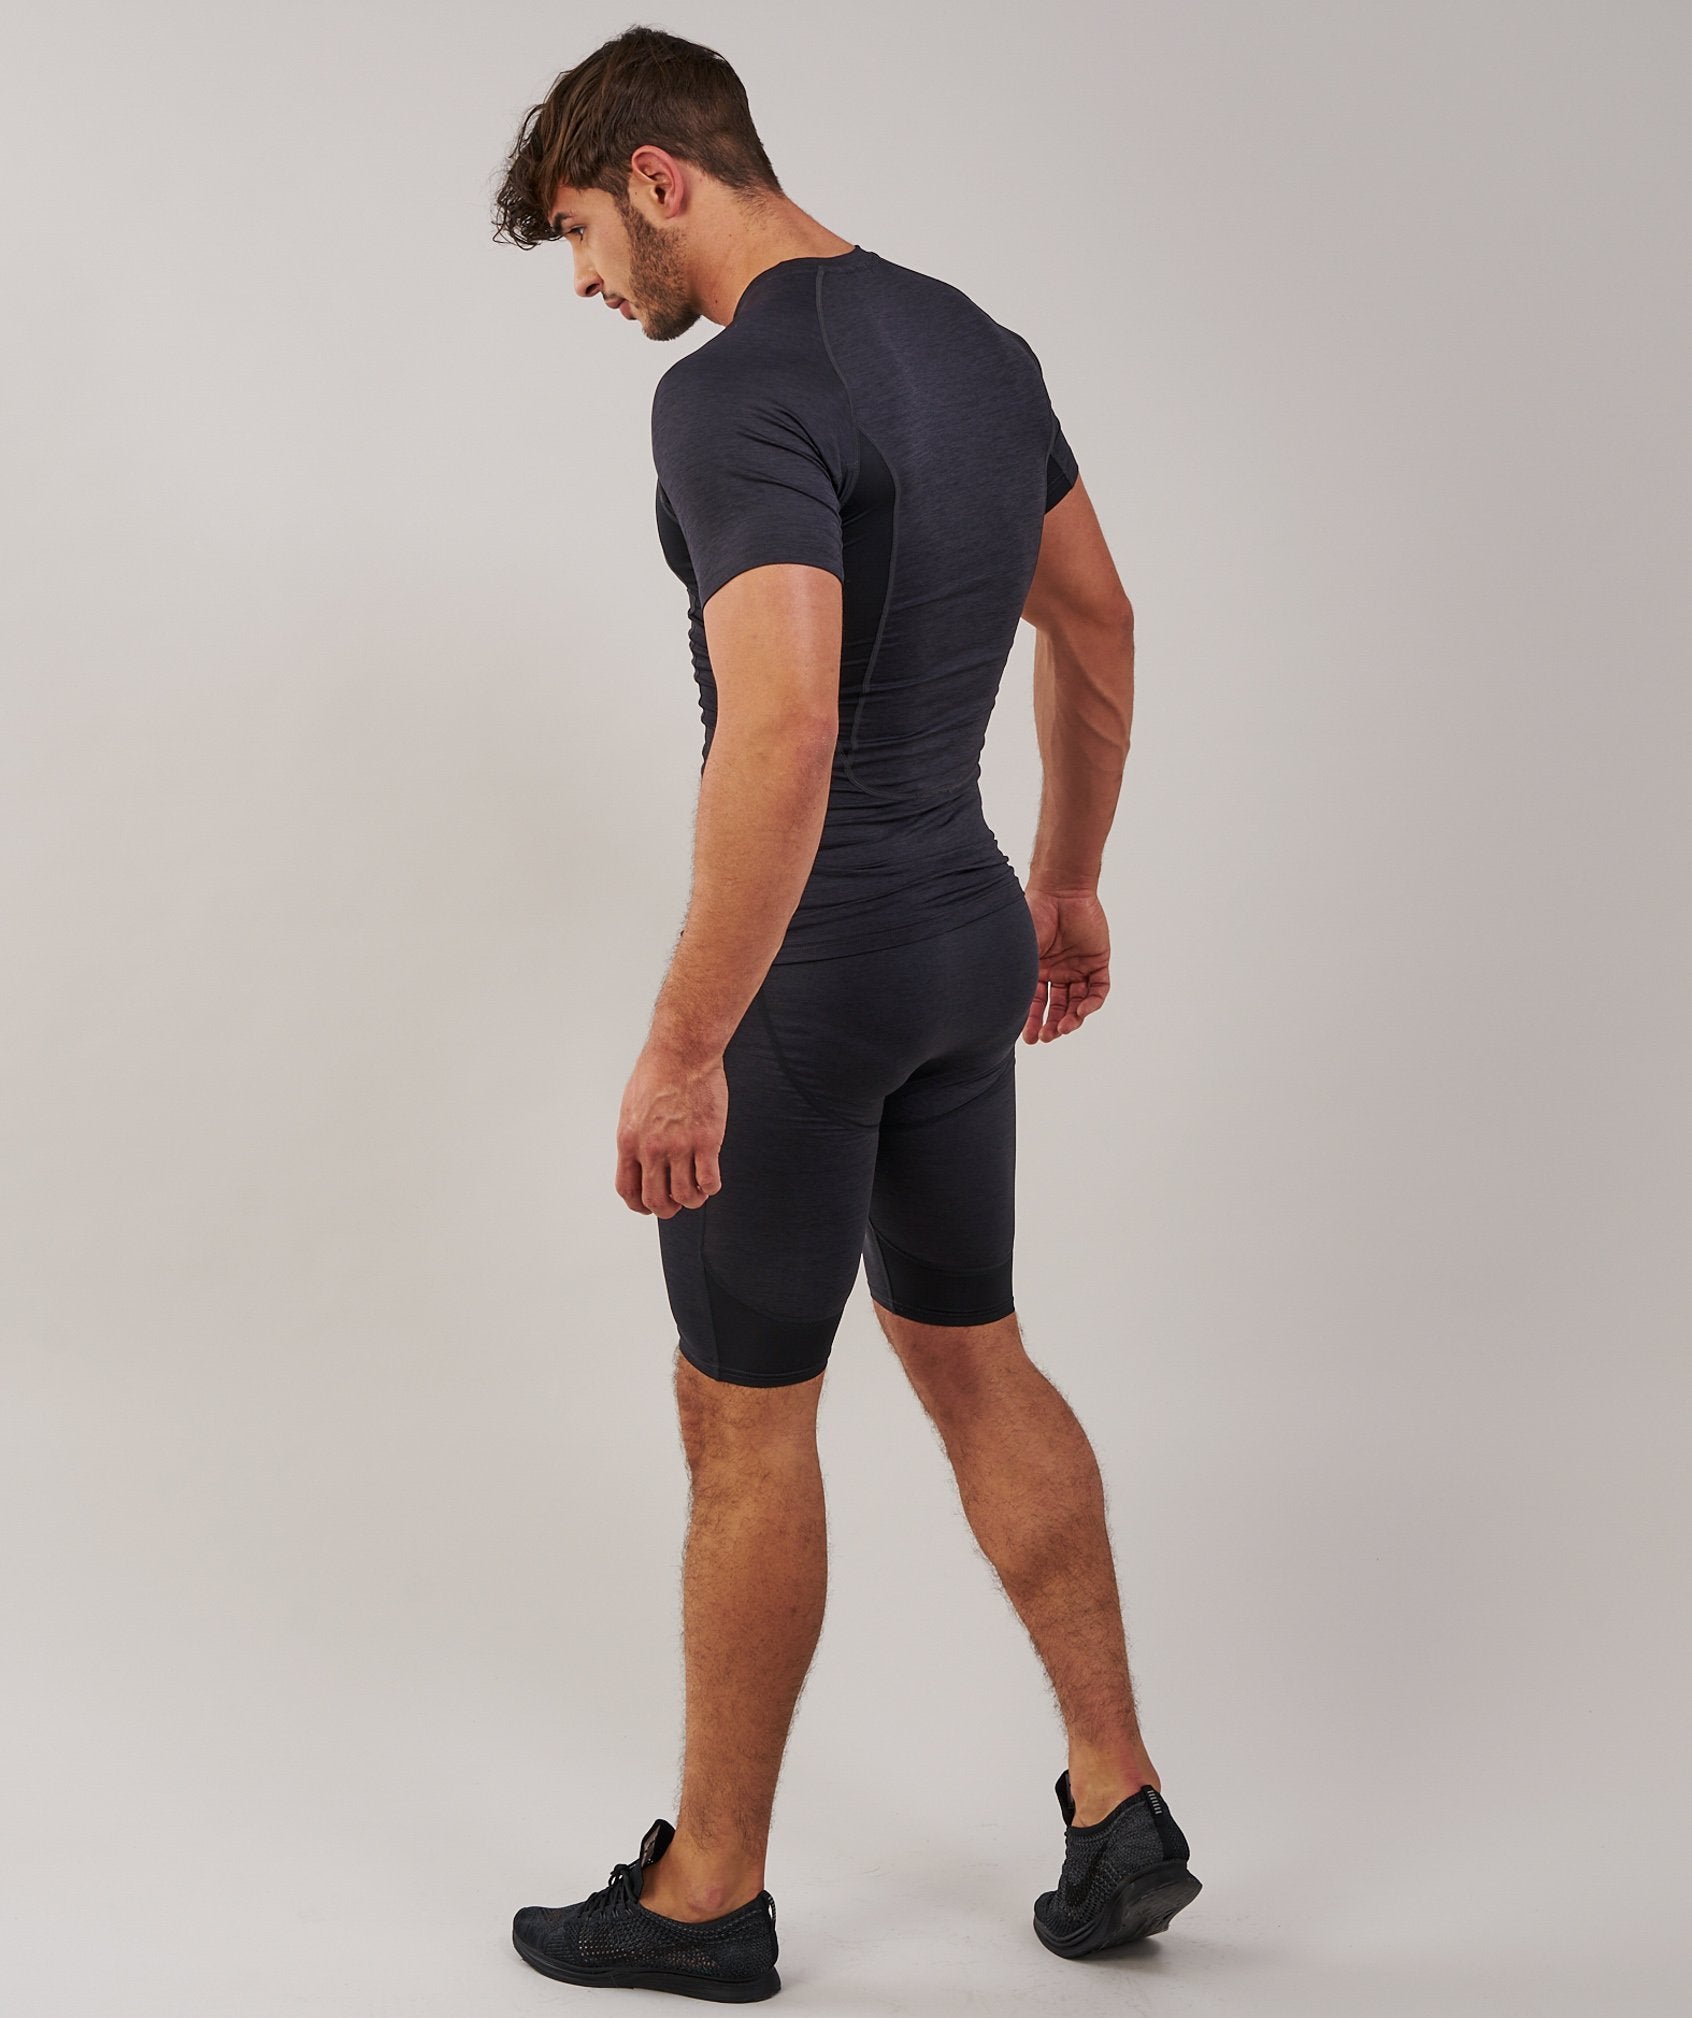 Element Baselayer Shorts in Black Marl - view 3